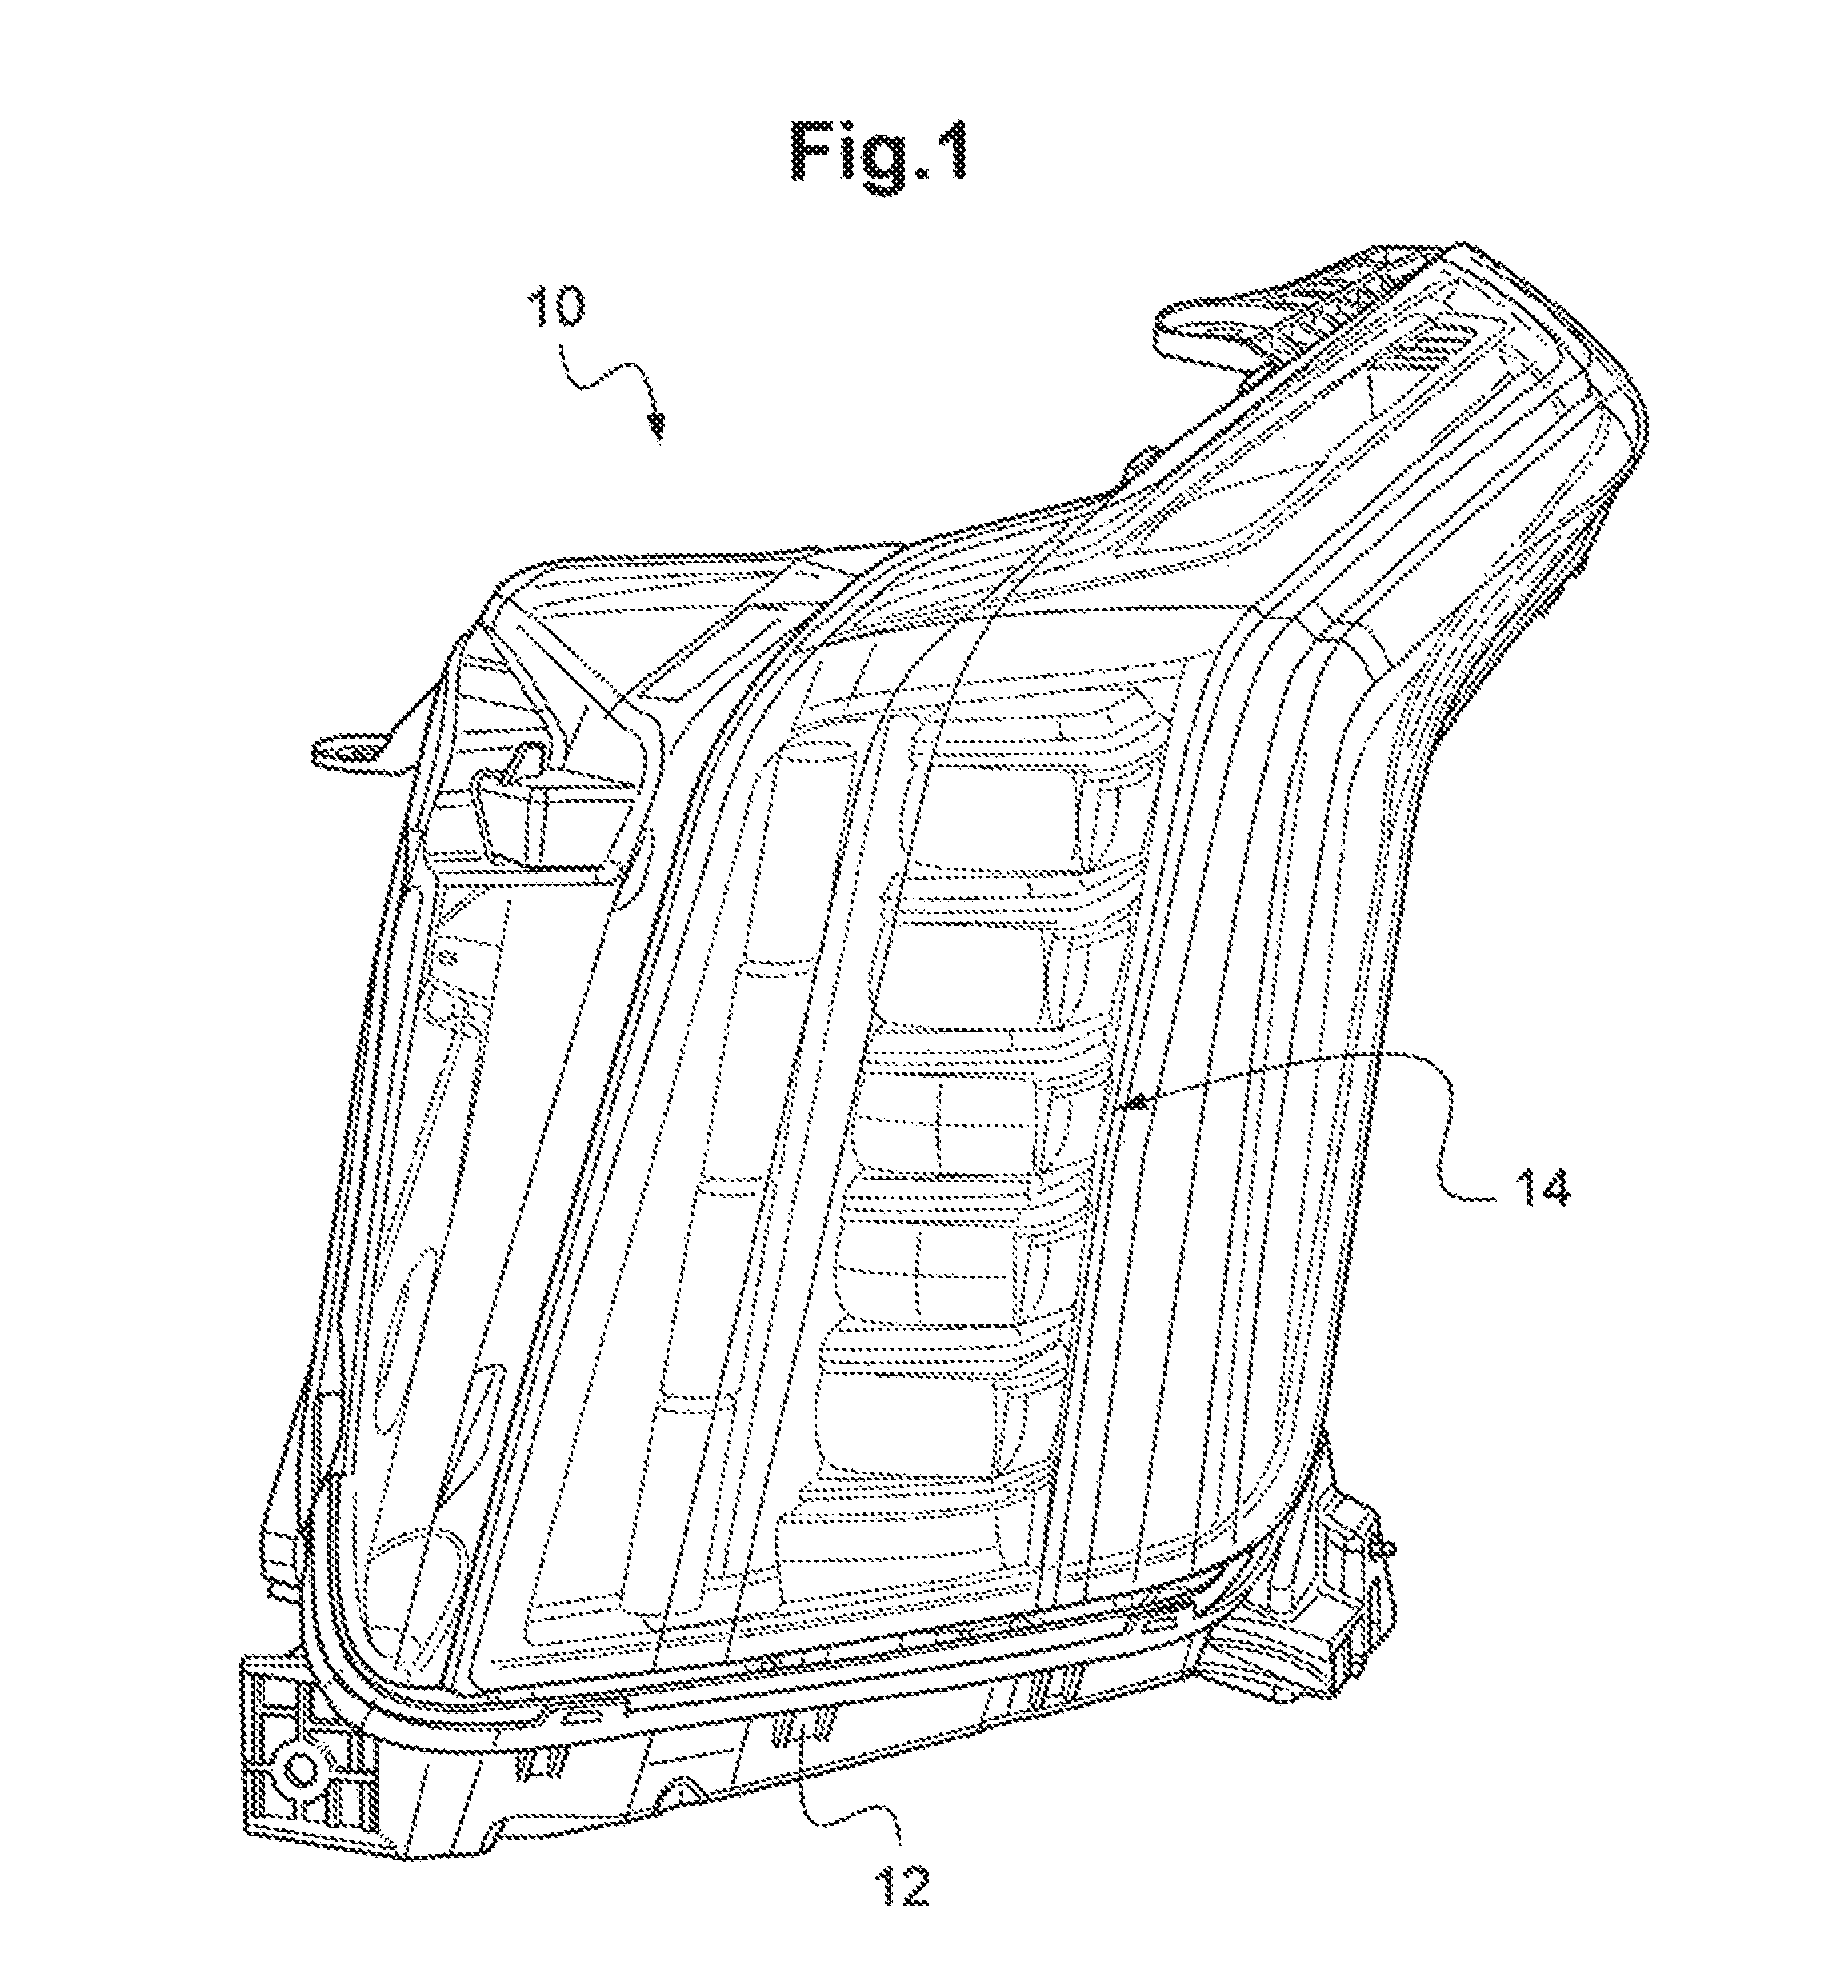 Headlight dampening system and method